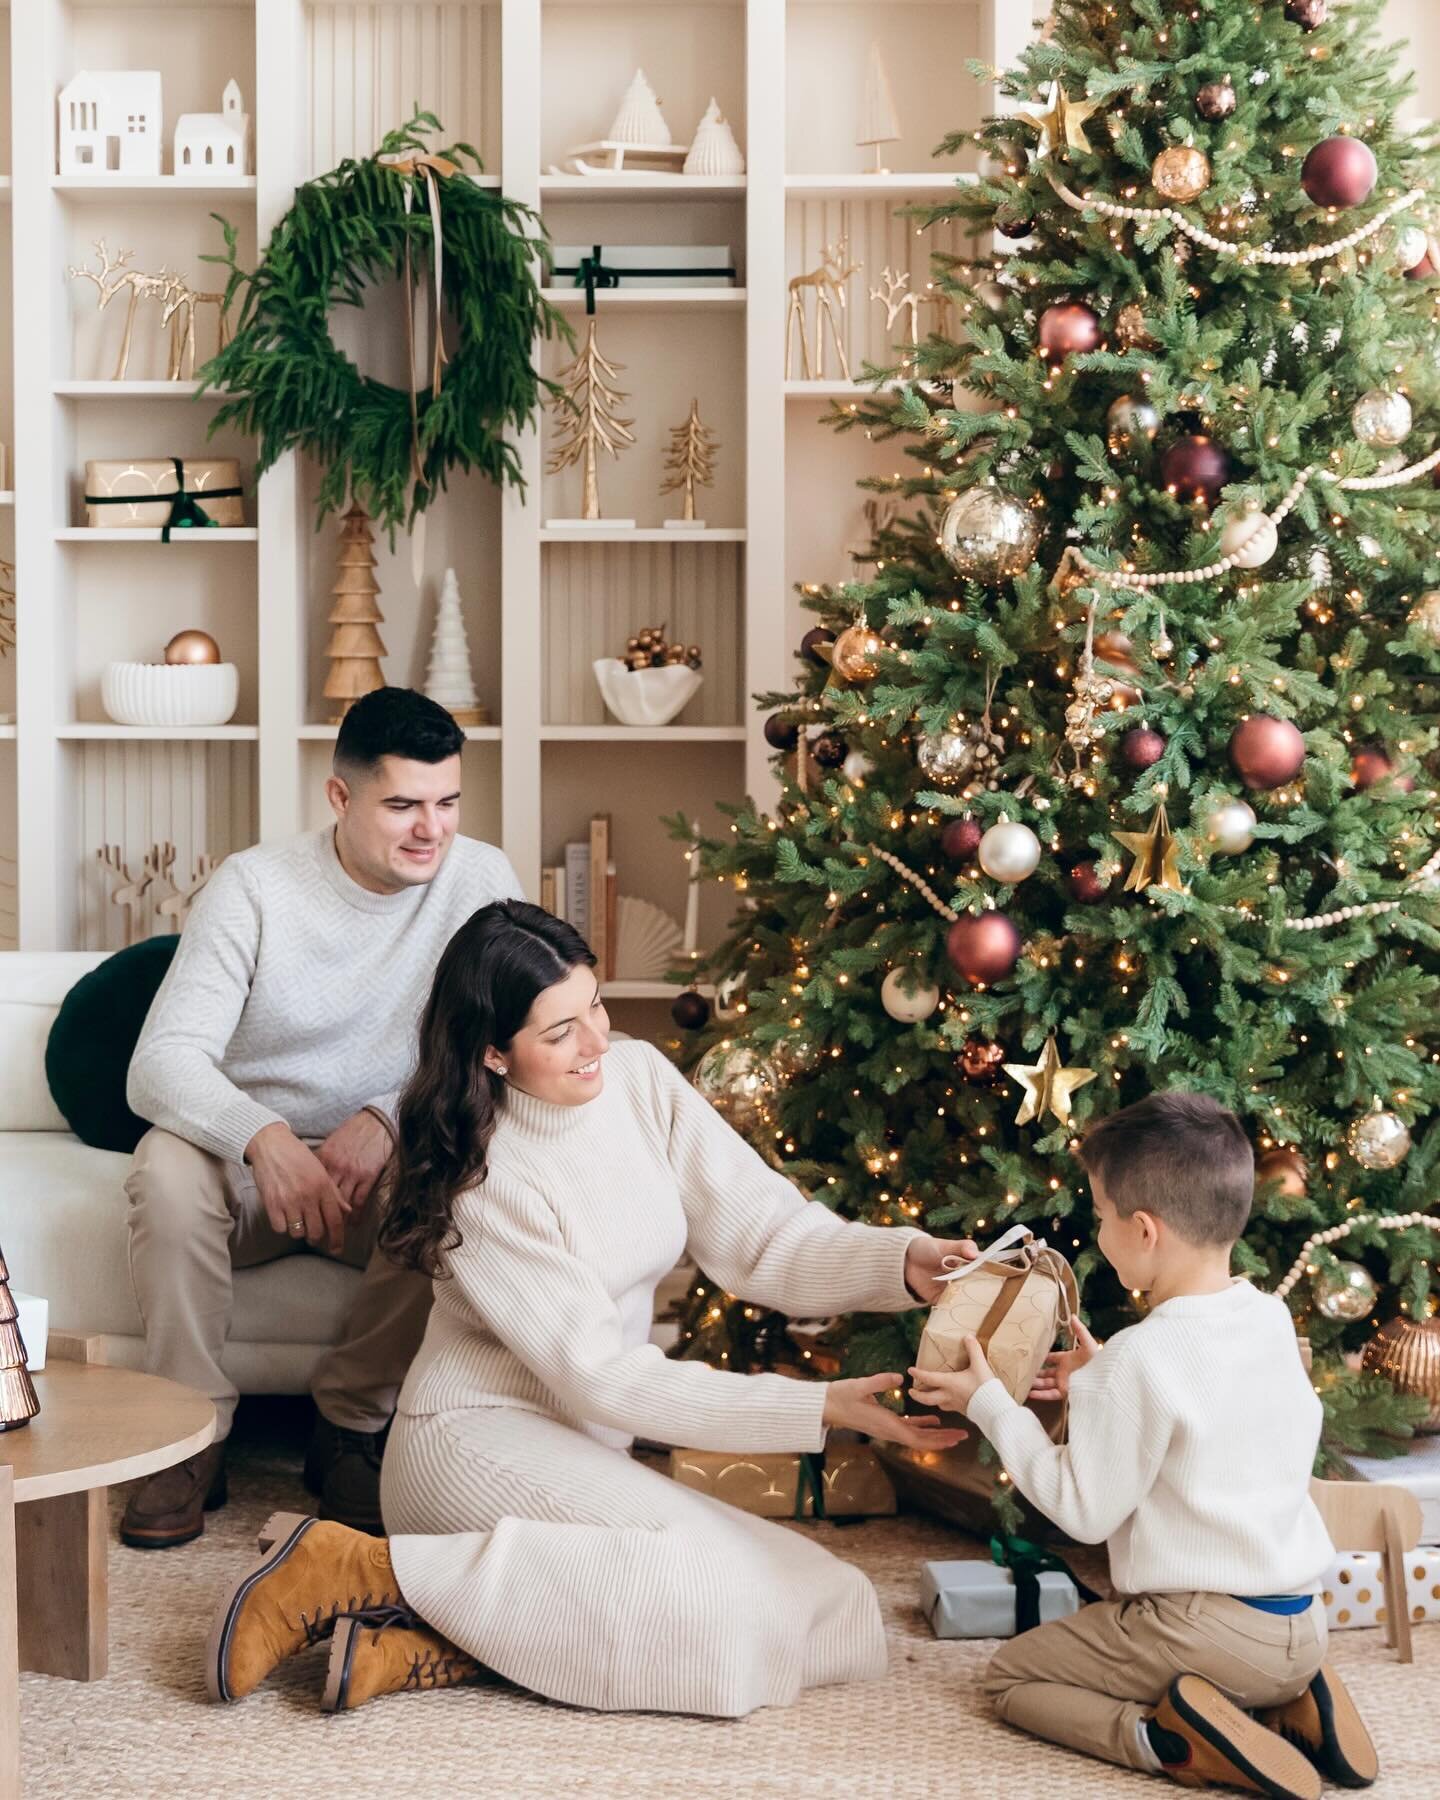 We love a cozy Christmas! 🎄The Kitchen Studio was recently completely transformed and according to Tijana, this is her dream kitchen!! Who can blame her though? 💛⁣⁣
⁣⁣
#mintroomholiday #mintroomstudios #mintroombest #pretoloft #kitchenstudio #kitch